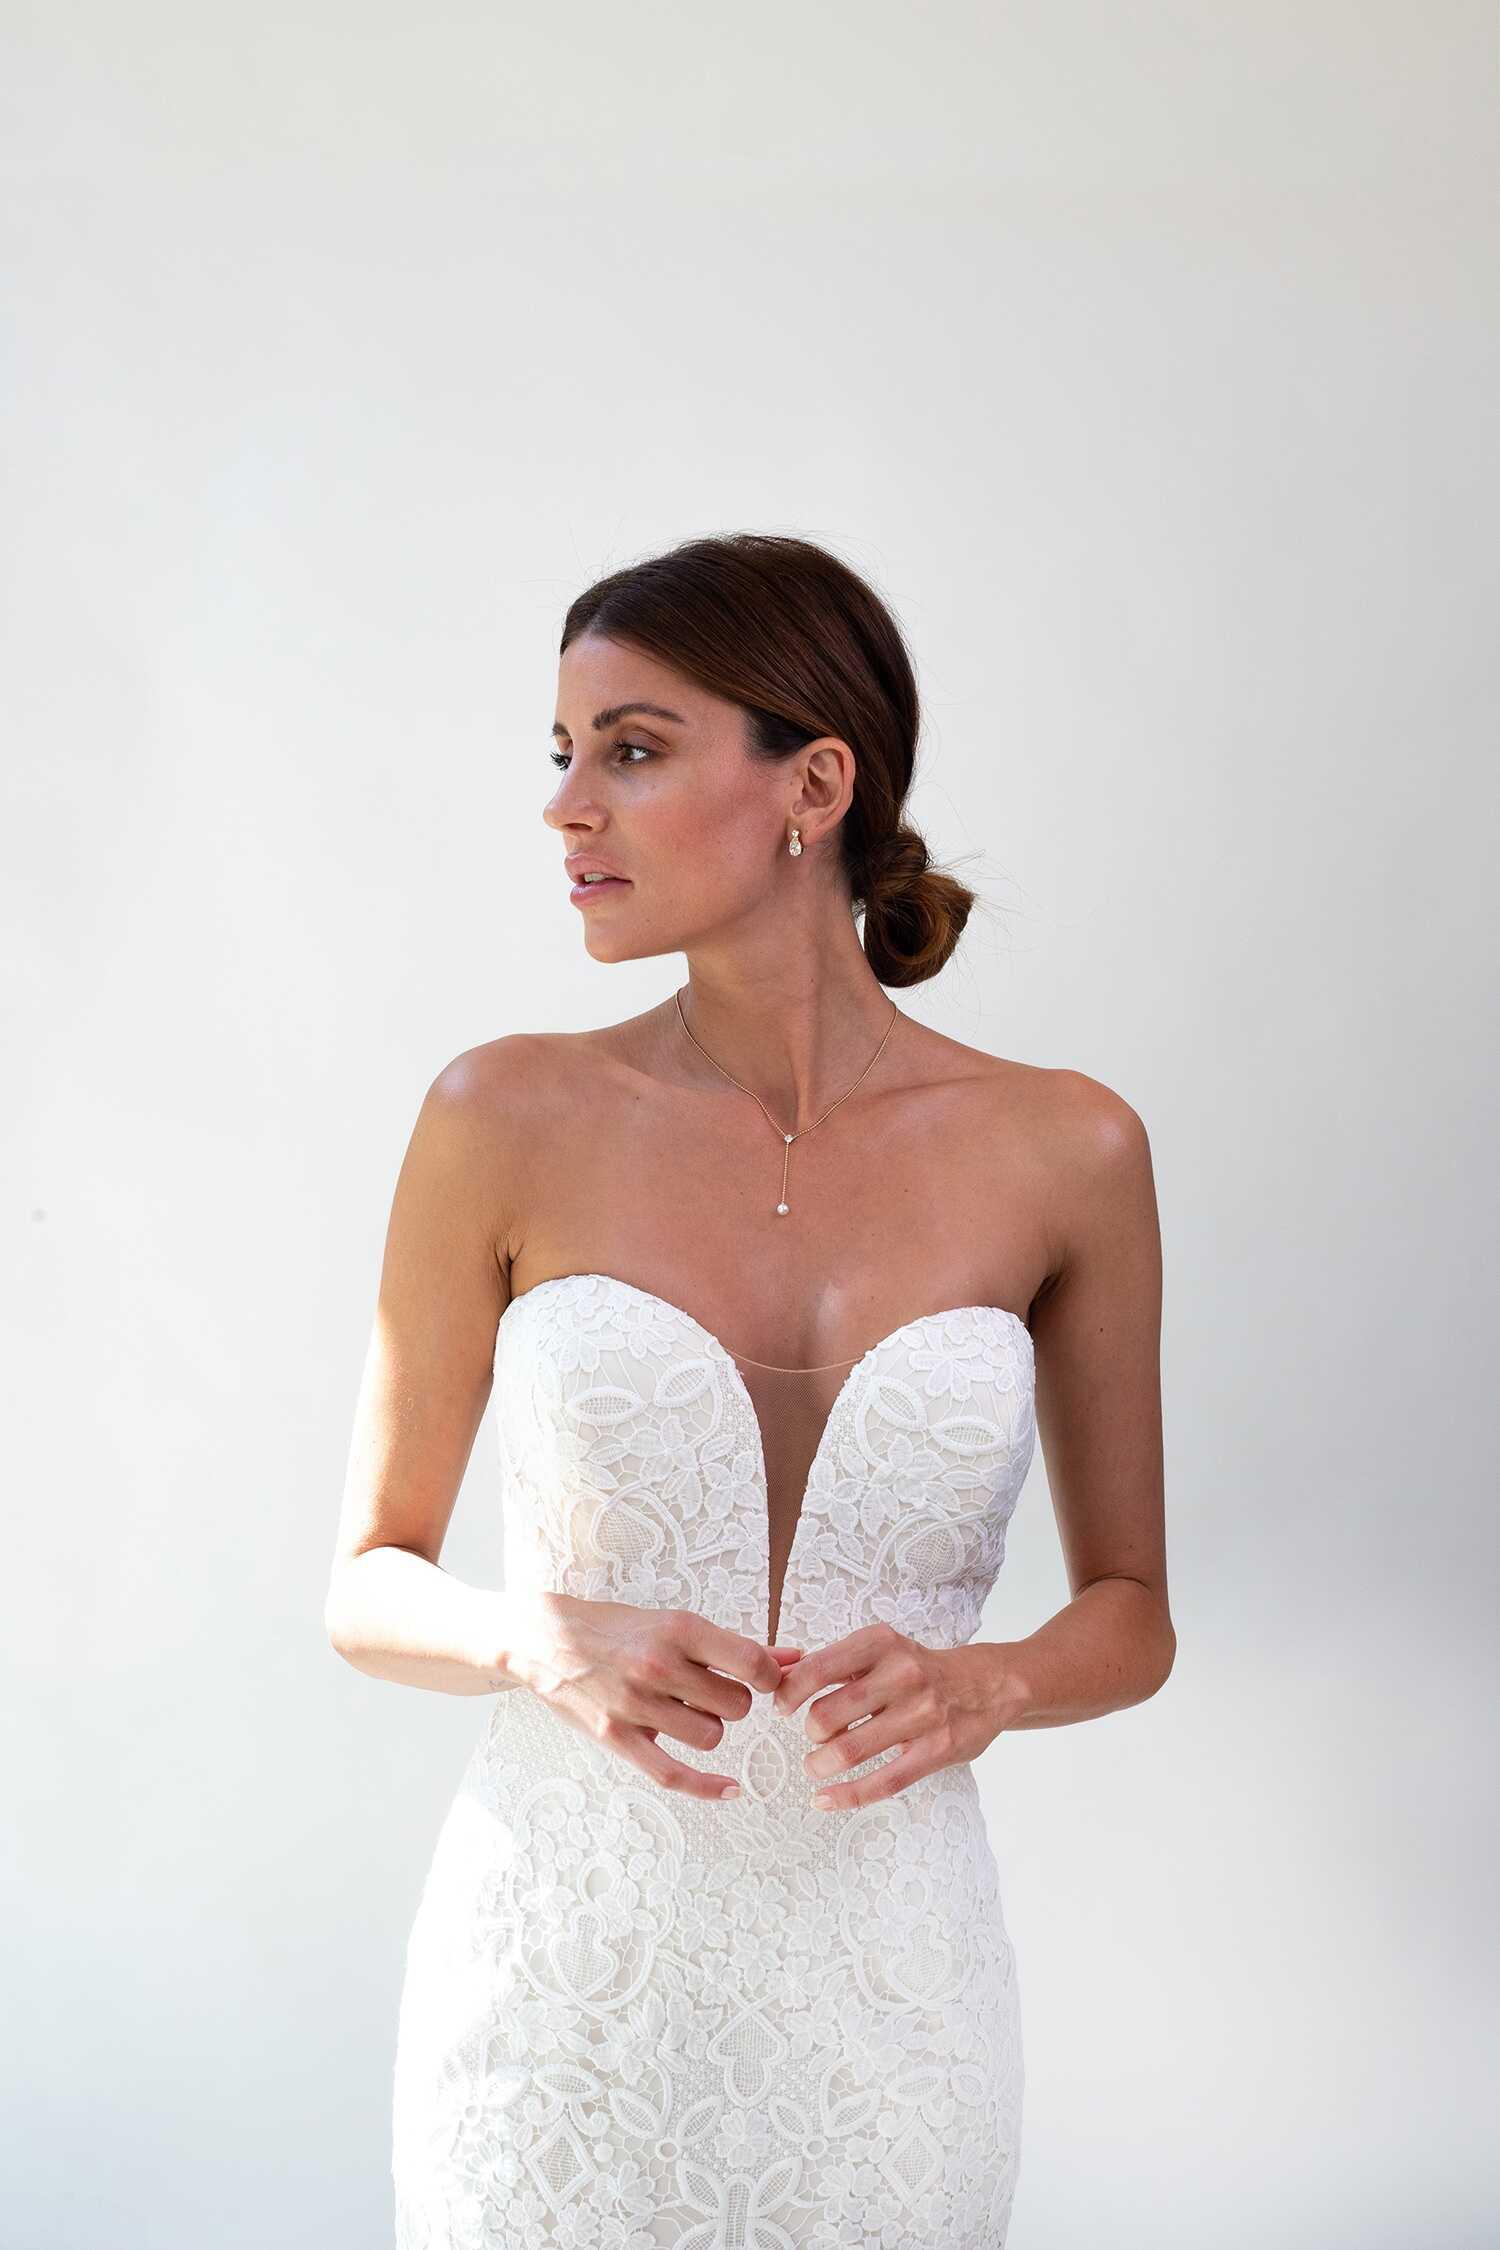 A guide to choosing bridal jewelry for every wedding dress' neckline